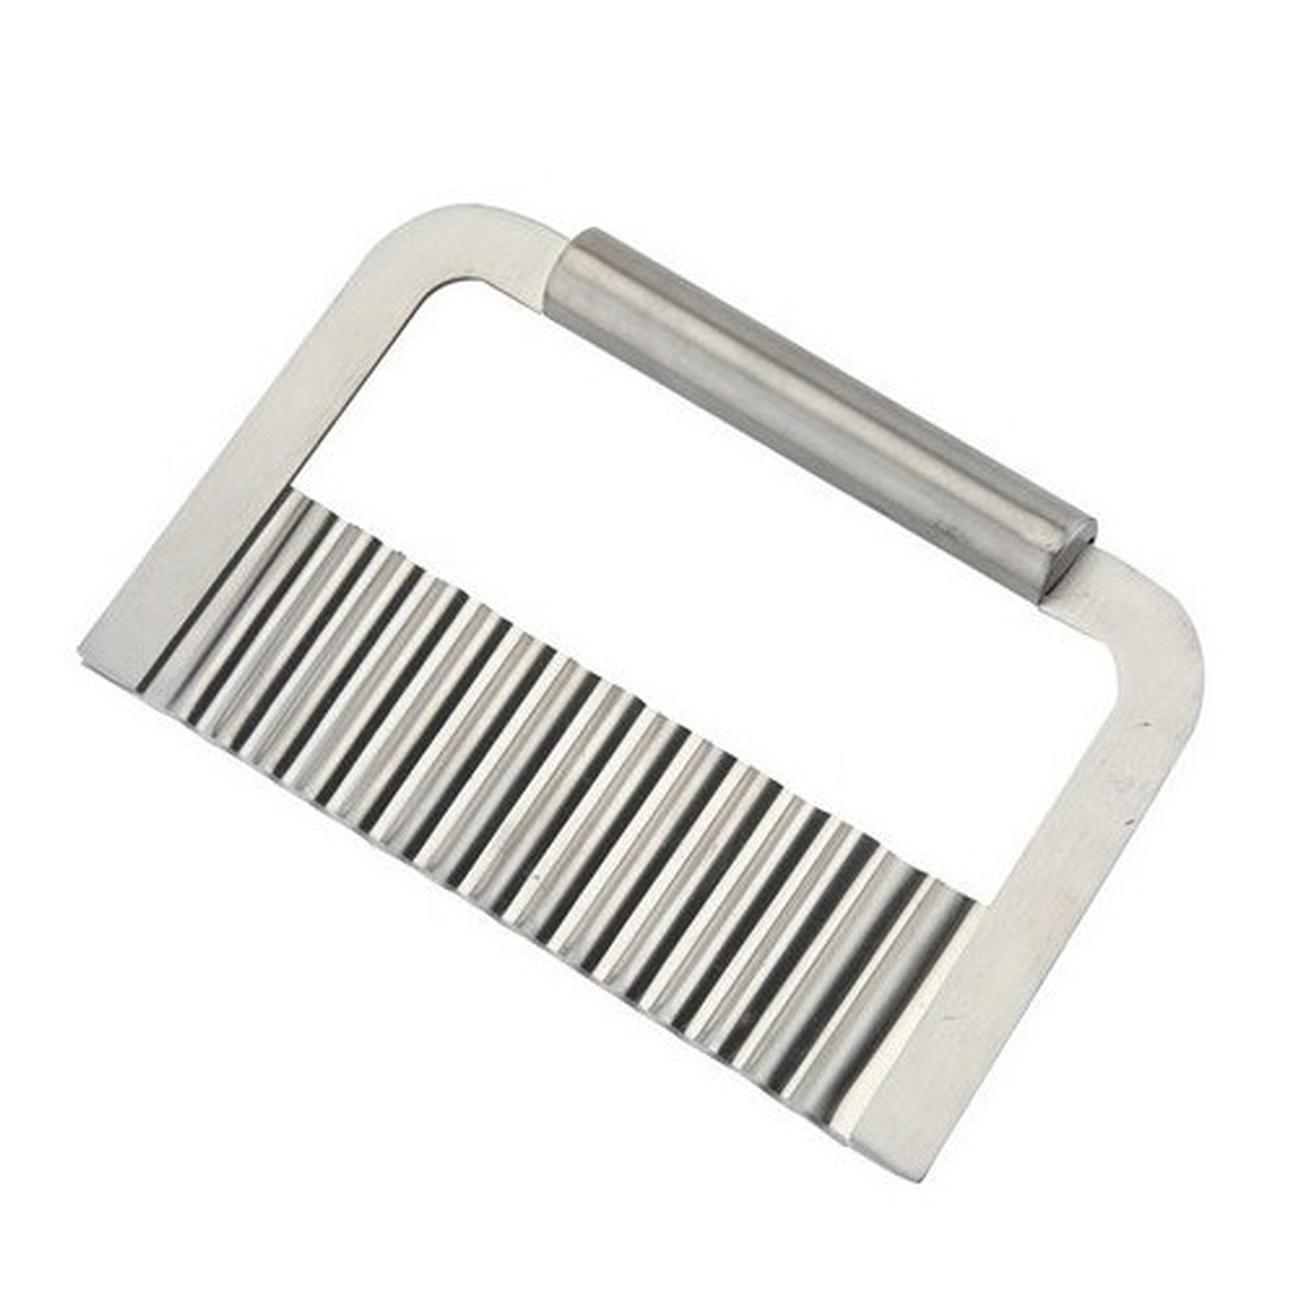 Gefu French Fry Cutter Stainless Steel Cutto